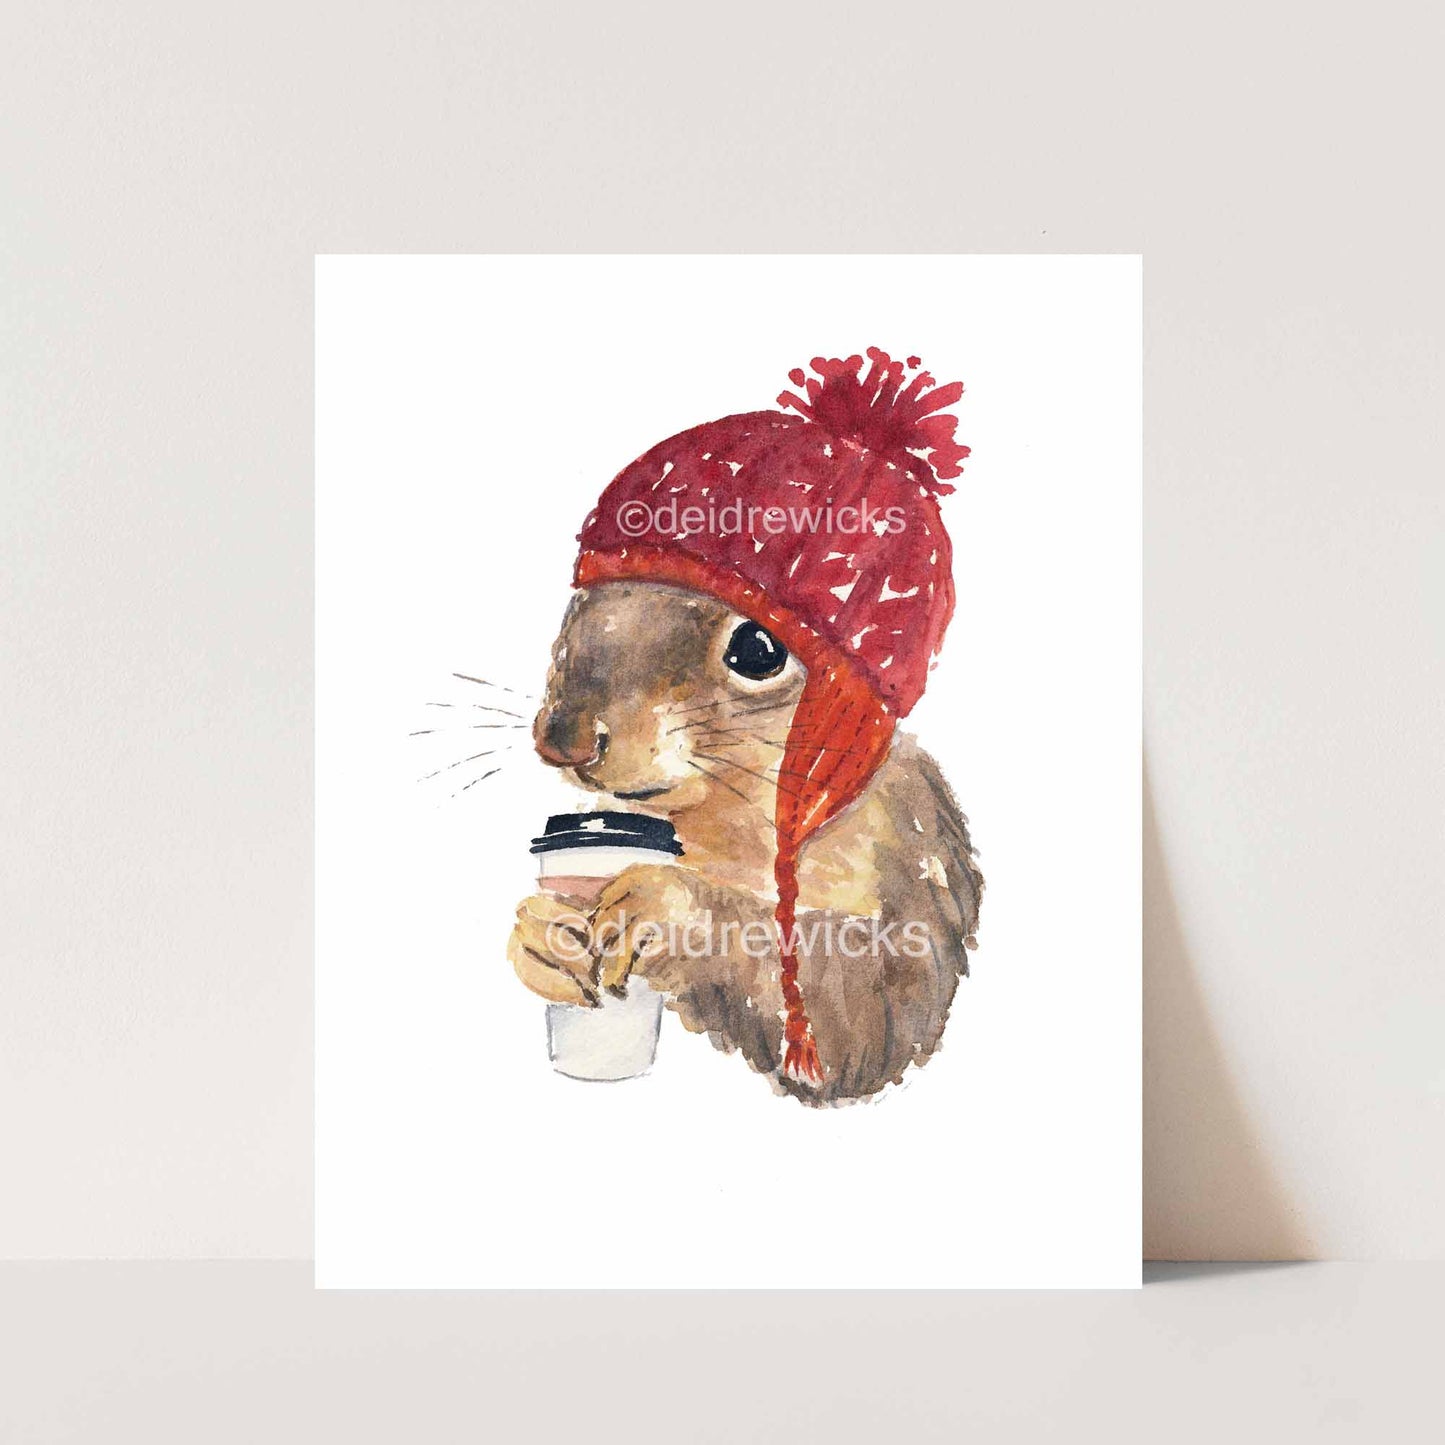 Animal watercolour painting of a squirrel wearing a hat and drinking coffee by artist Deidre Wicks